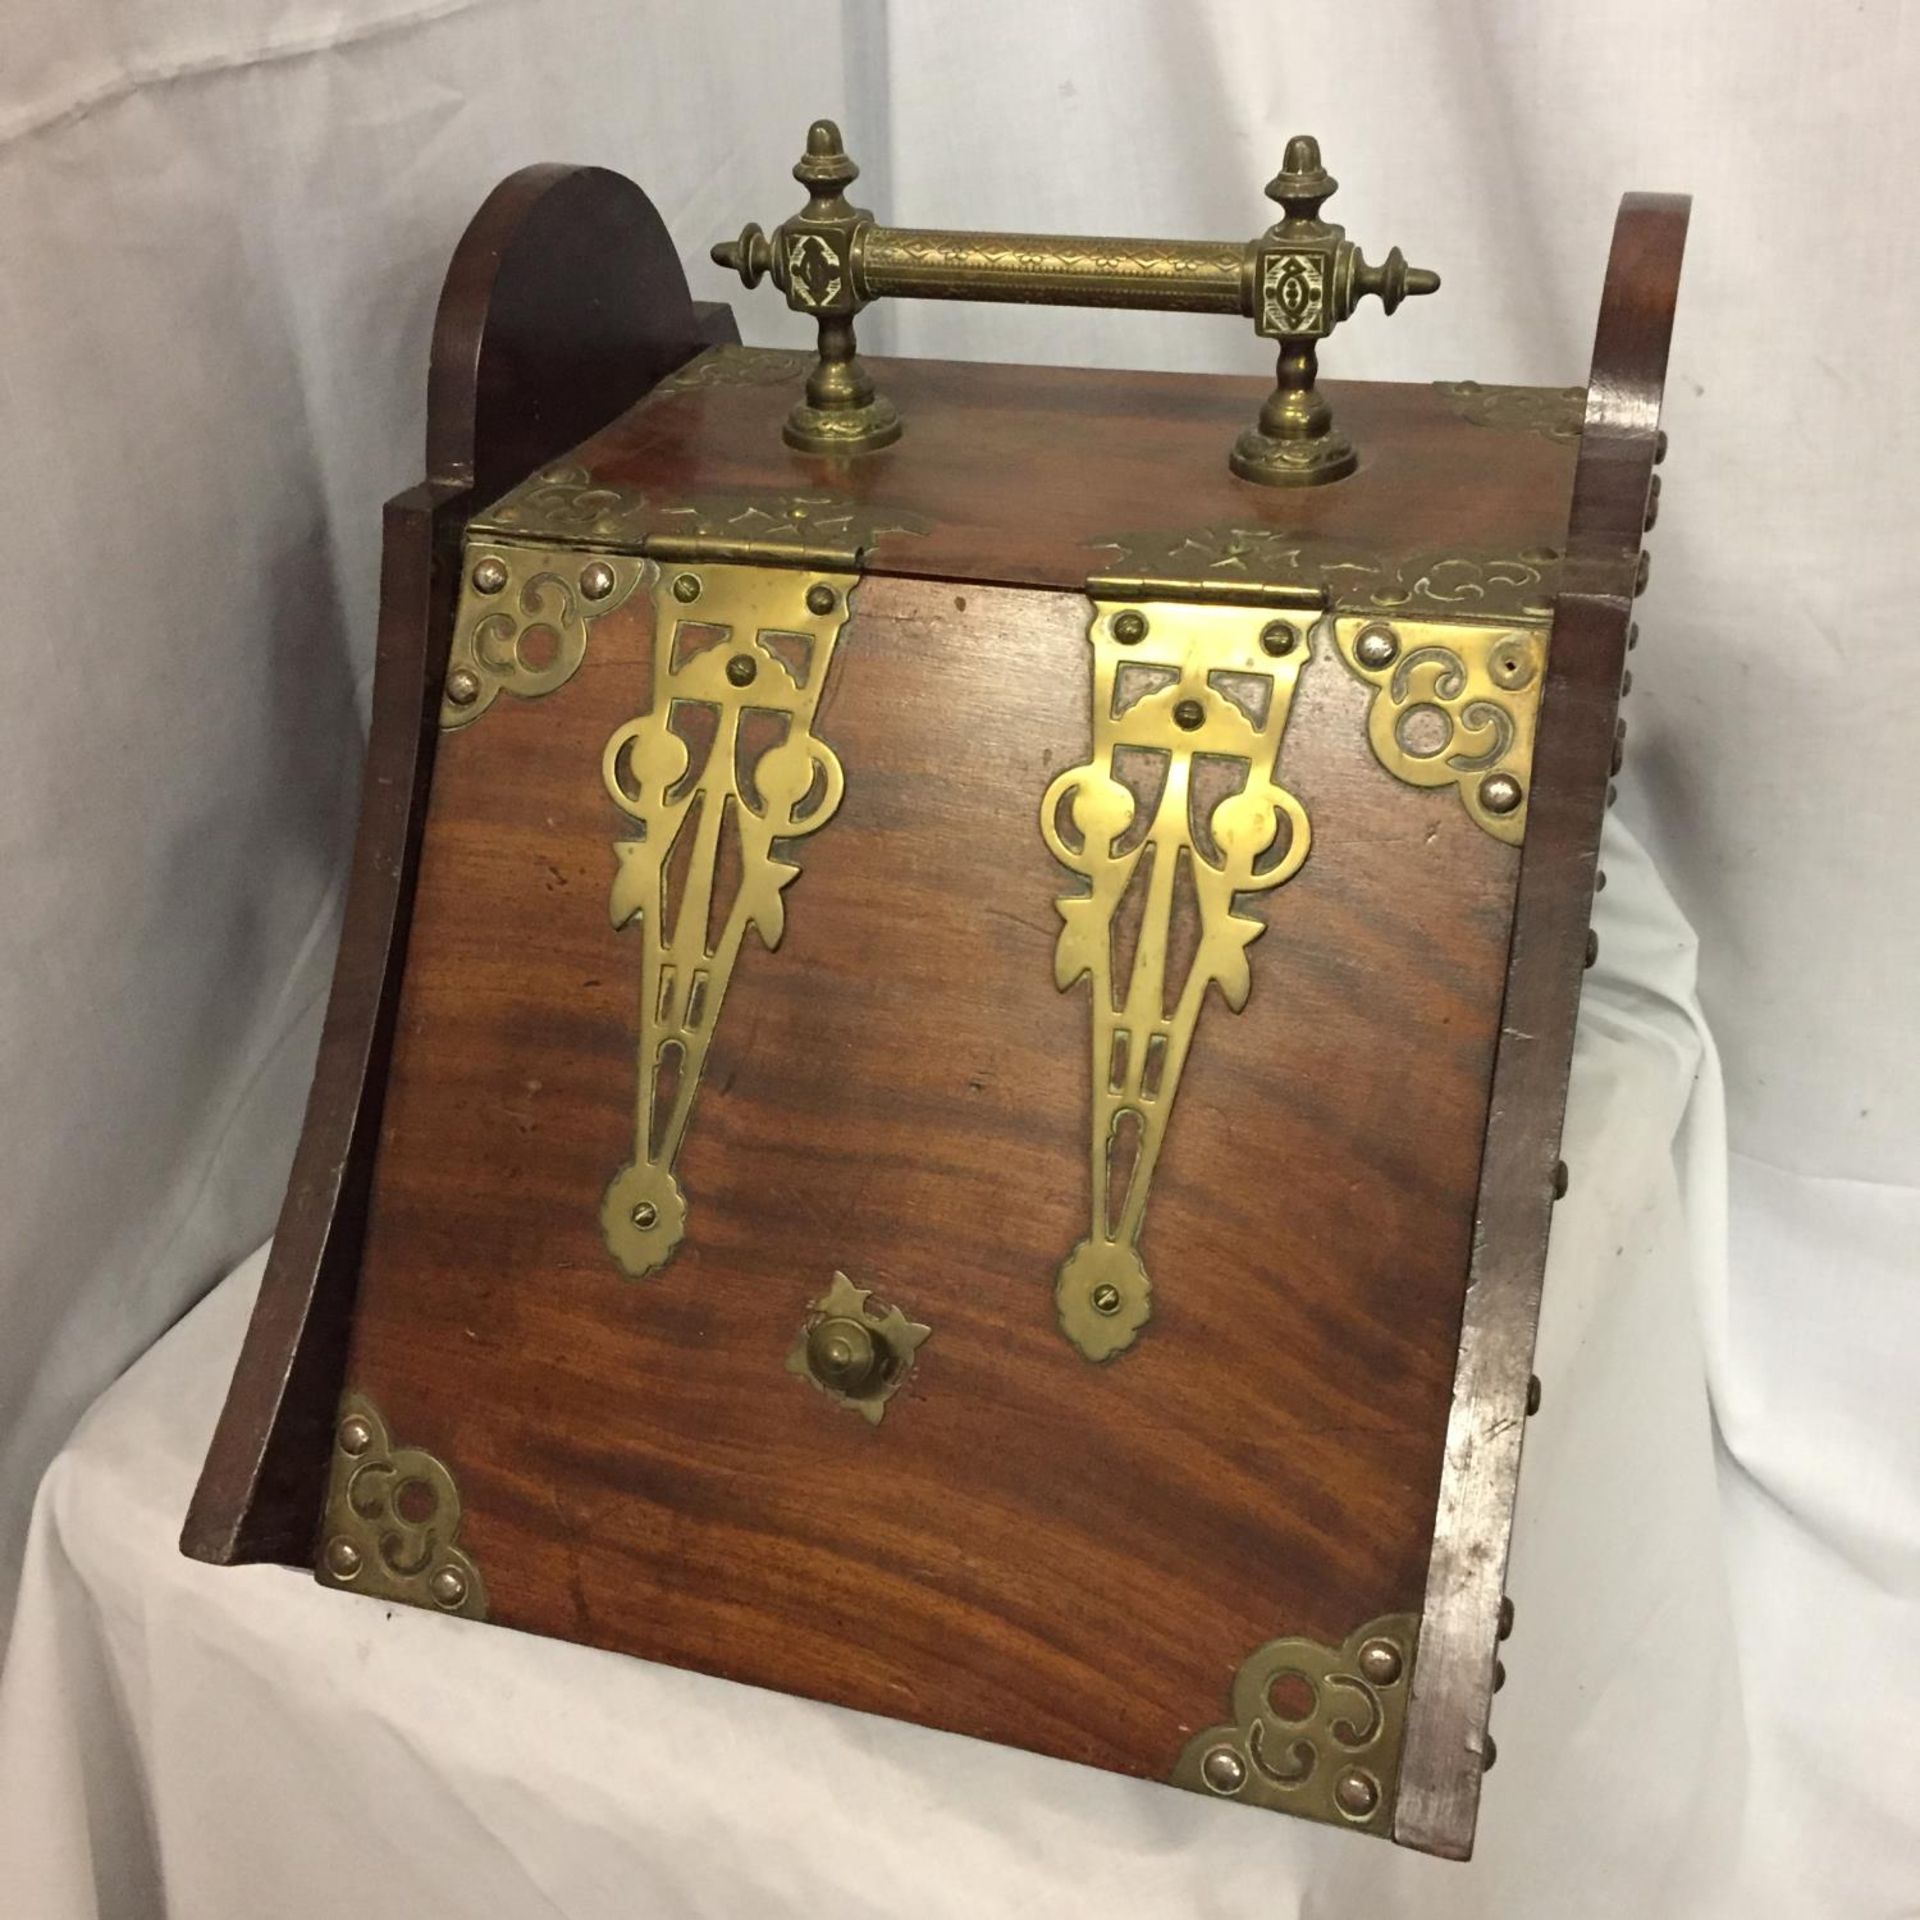 A WOODEN AND BRASS DECORATED COAL BOX - Image 2 of 4